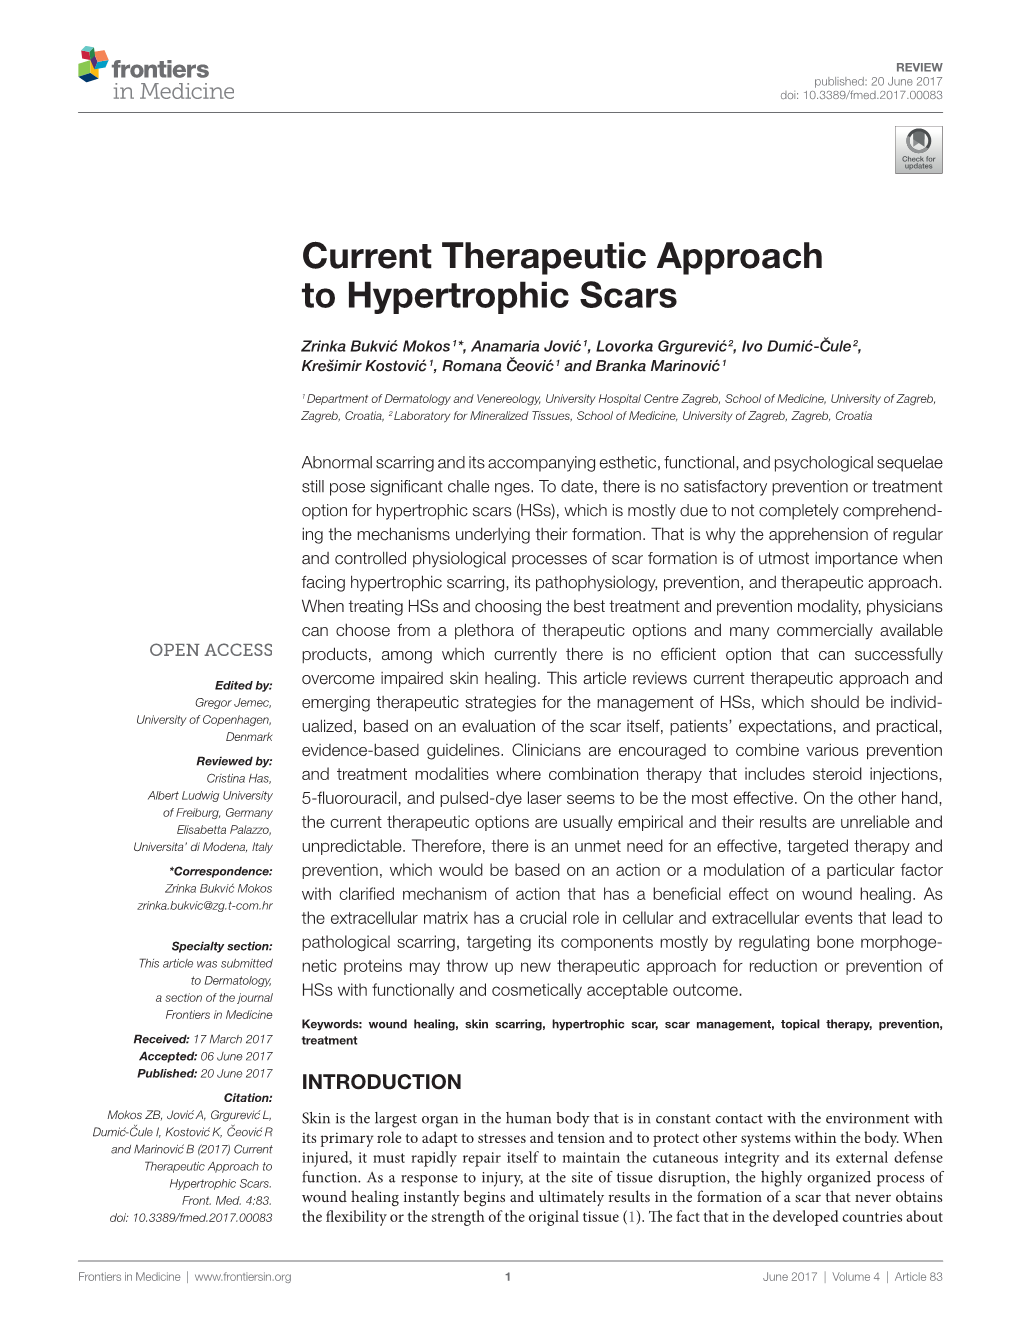 Current Therapeutic Approach to Hypertrophic Scars